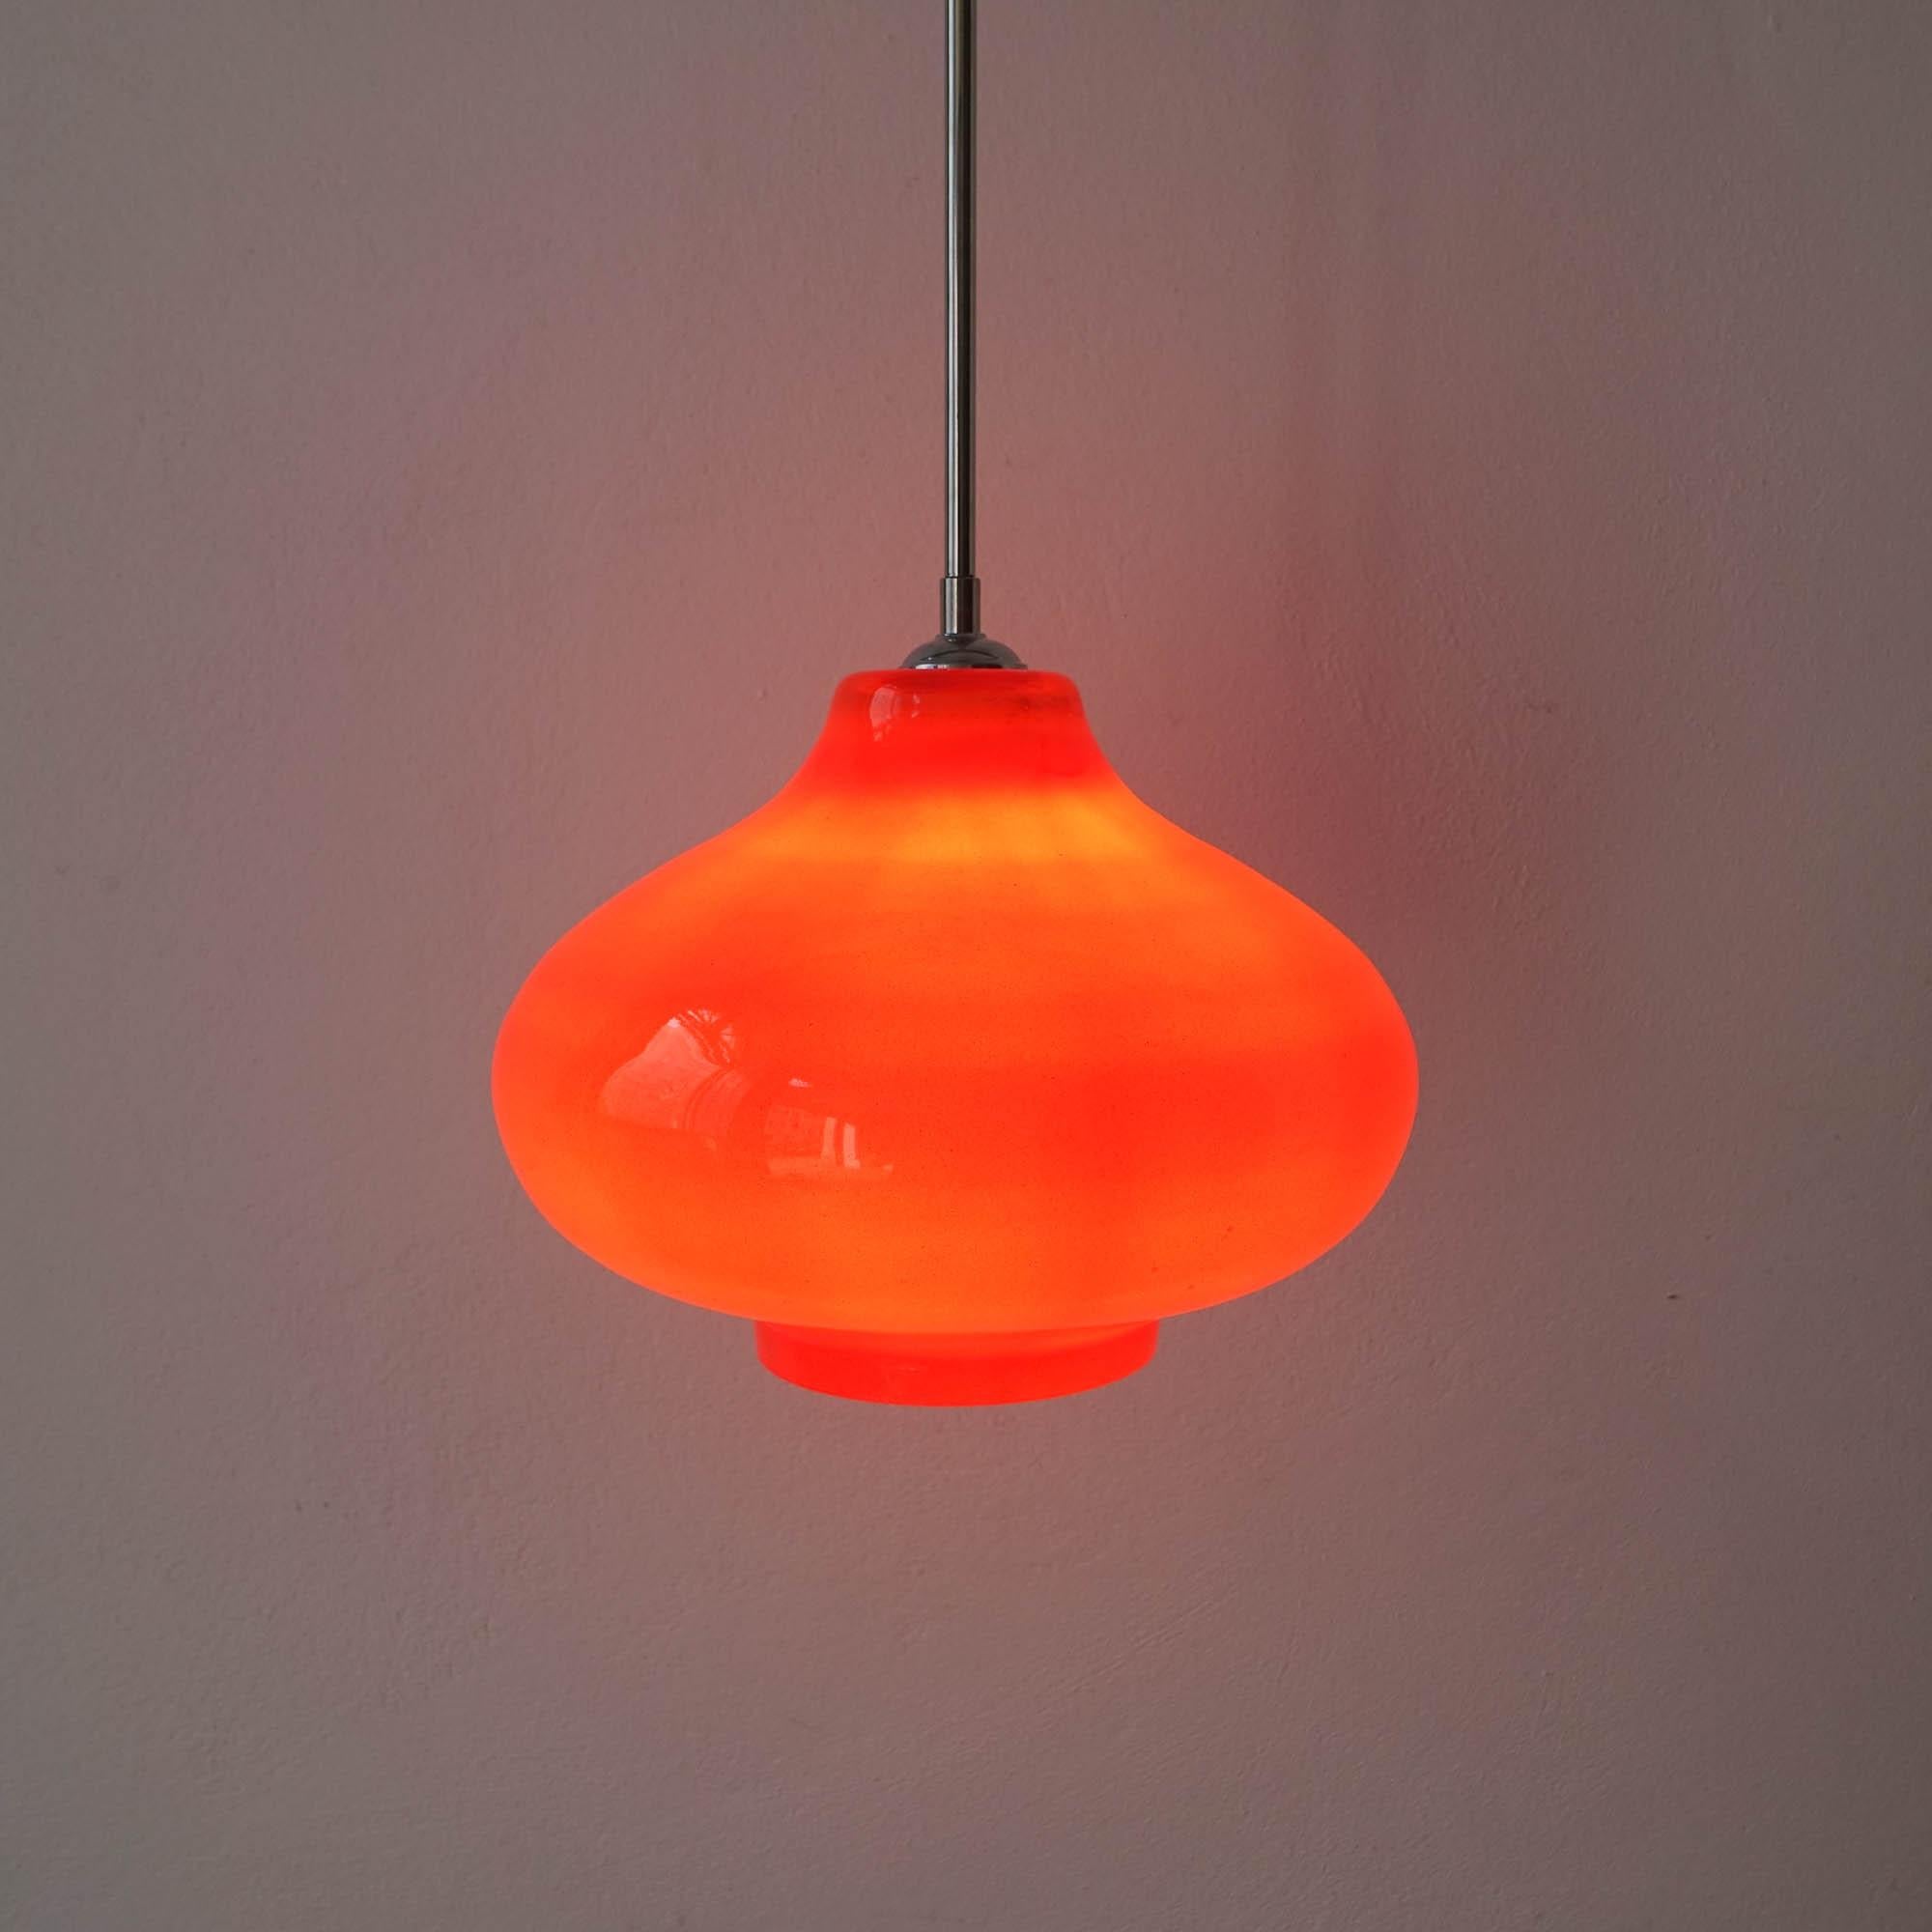 This pendant lamp was design and produced by Marinha Grande, in Portugal, during the 1960's. It is made in an orange opaline glass with all the original chrome metal parts in chrome. In original and good condition.